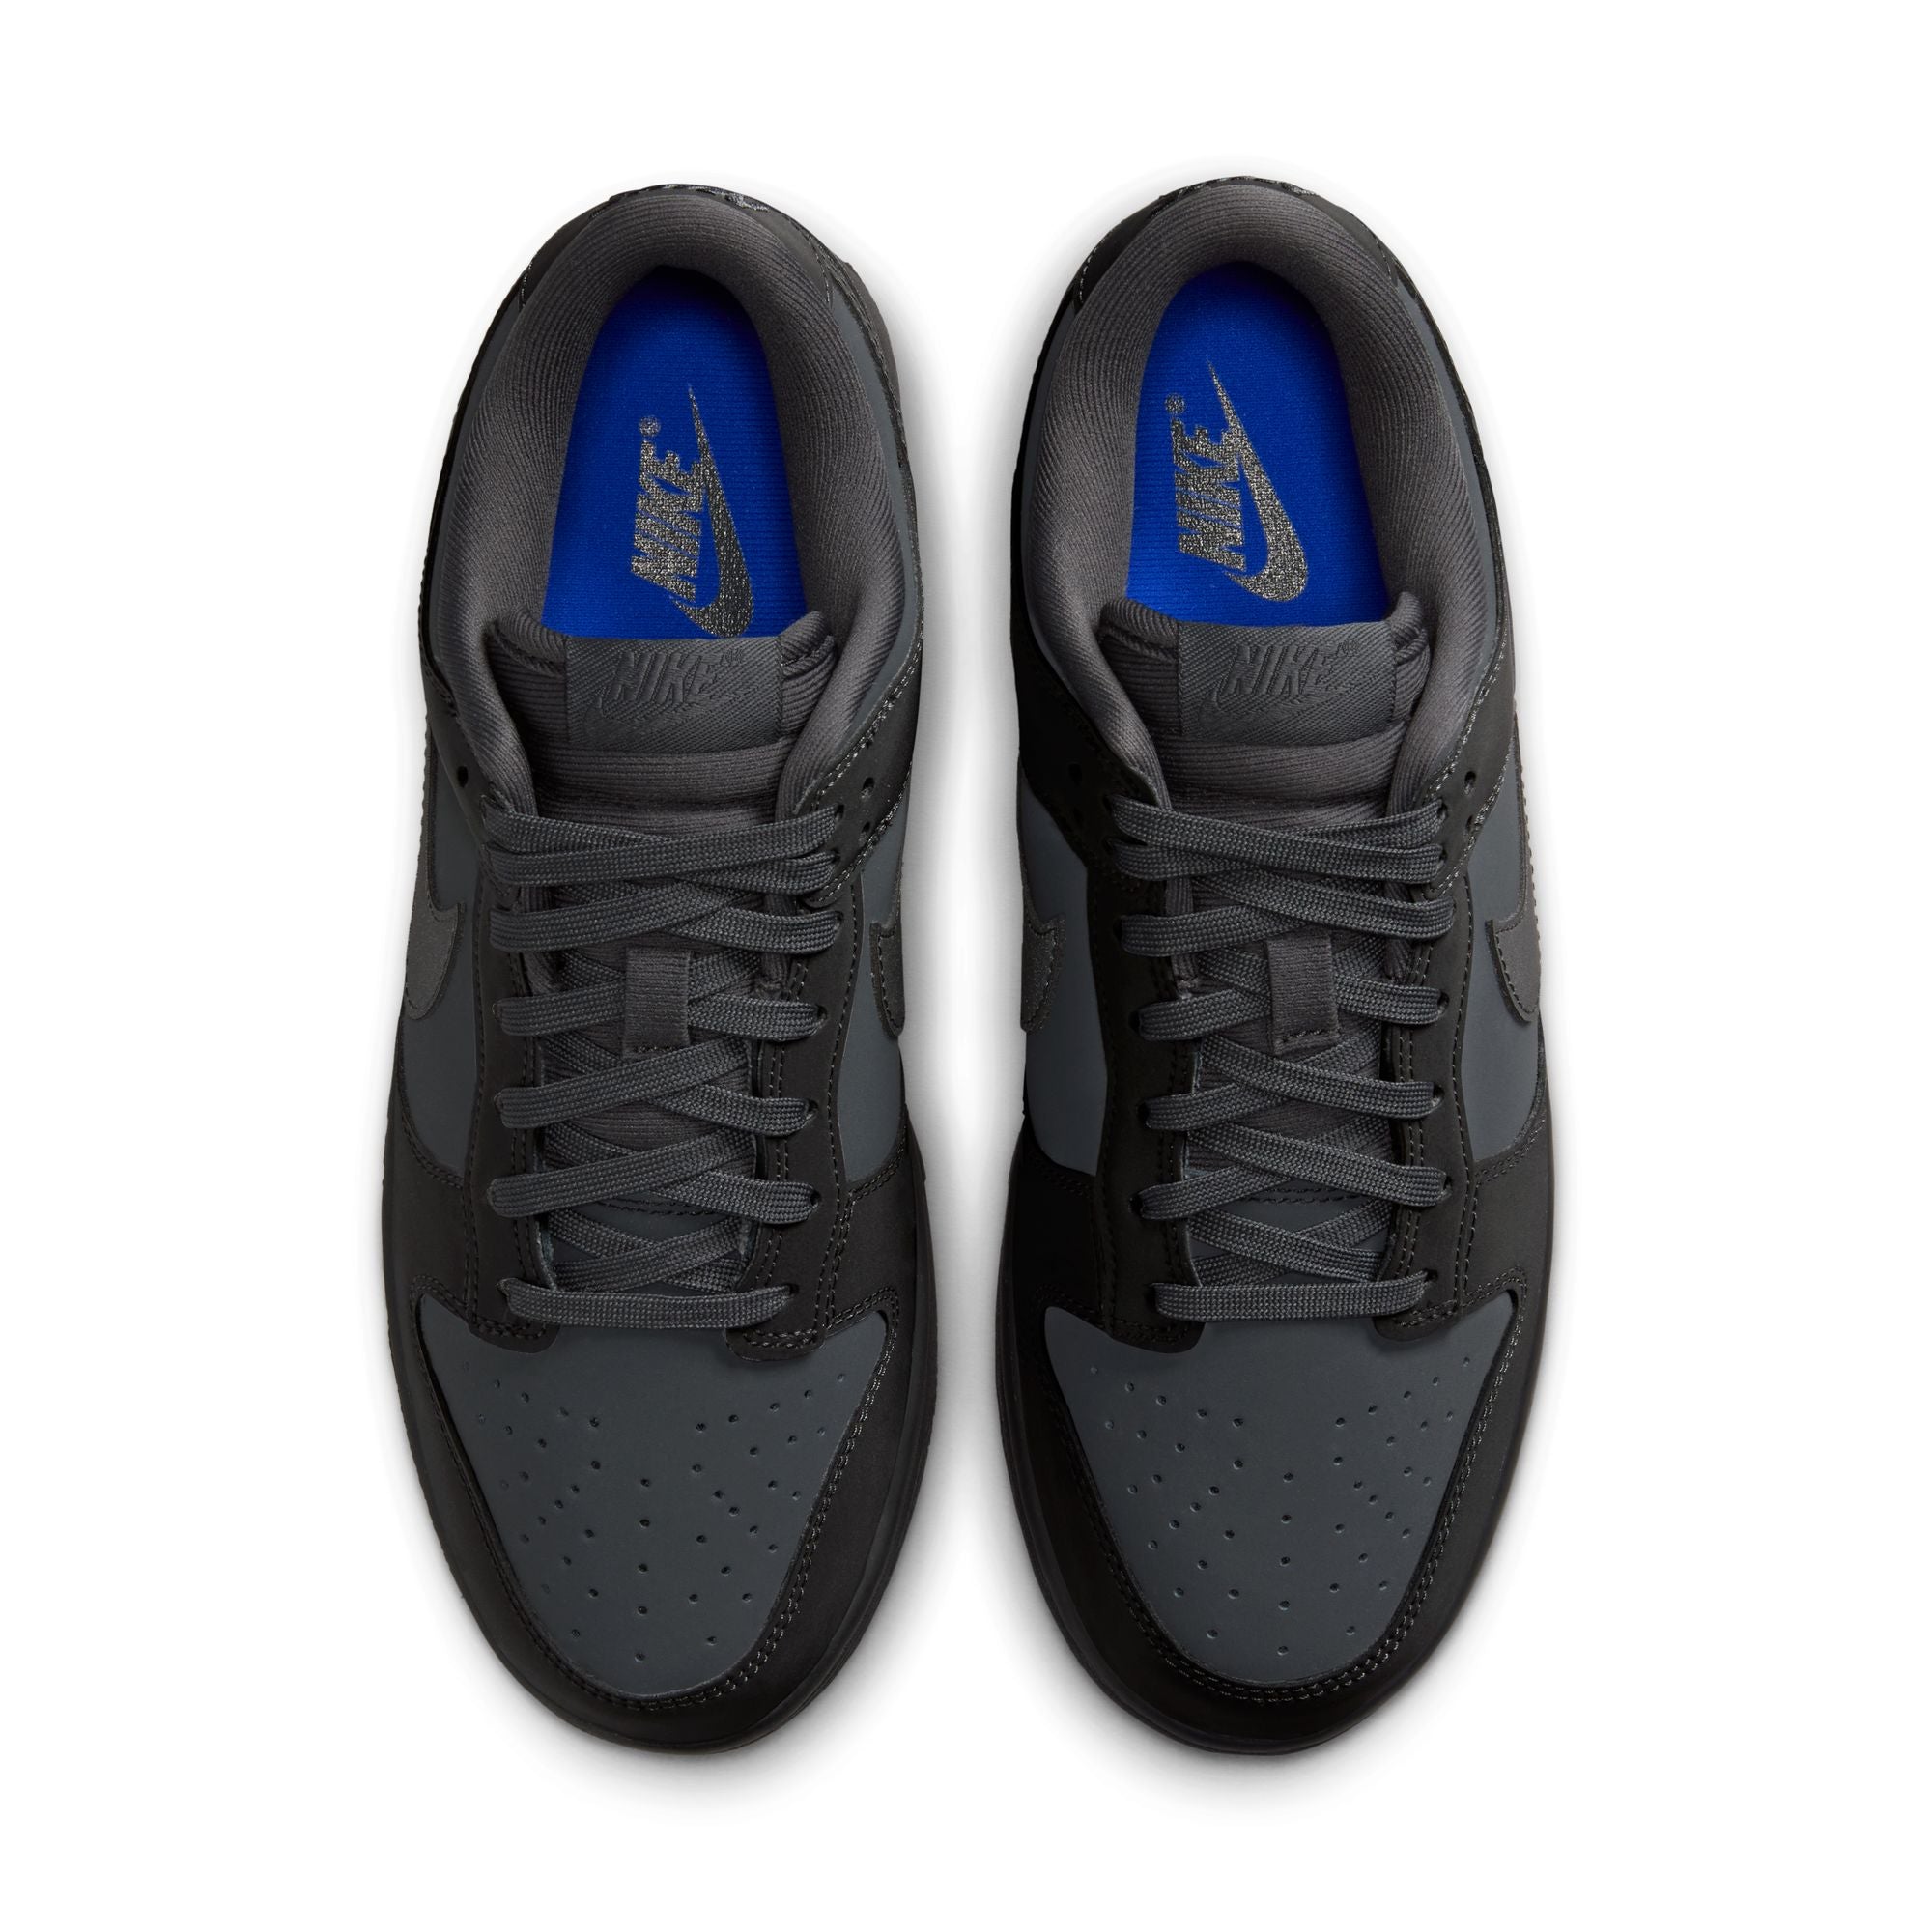 Womens Nike Dunk Low 'Anthracite'